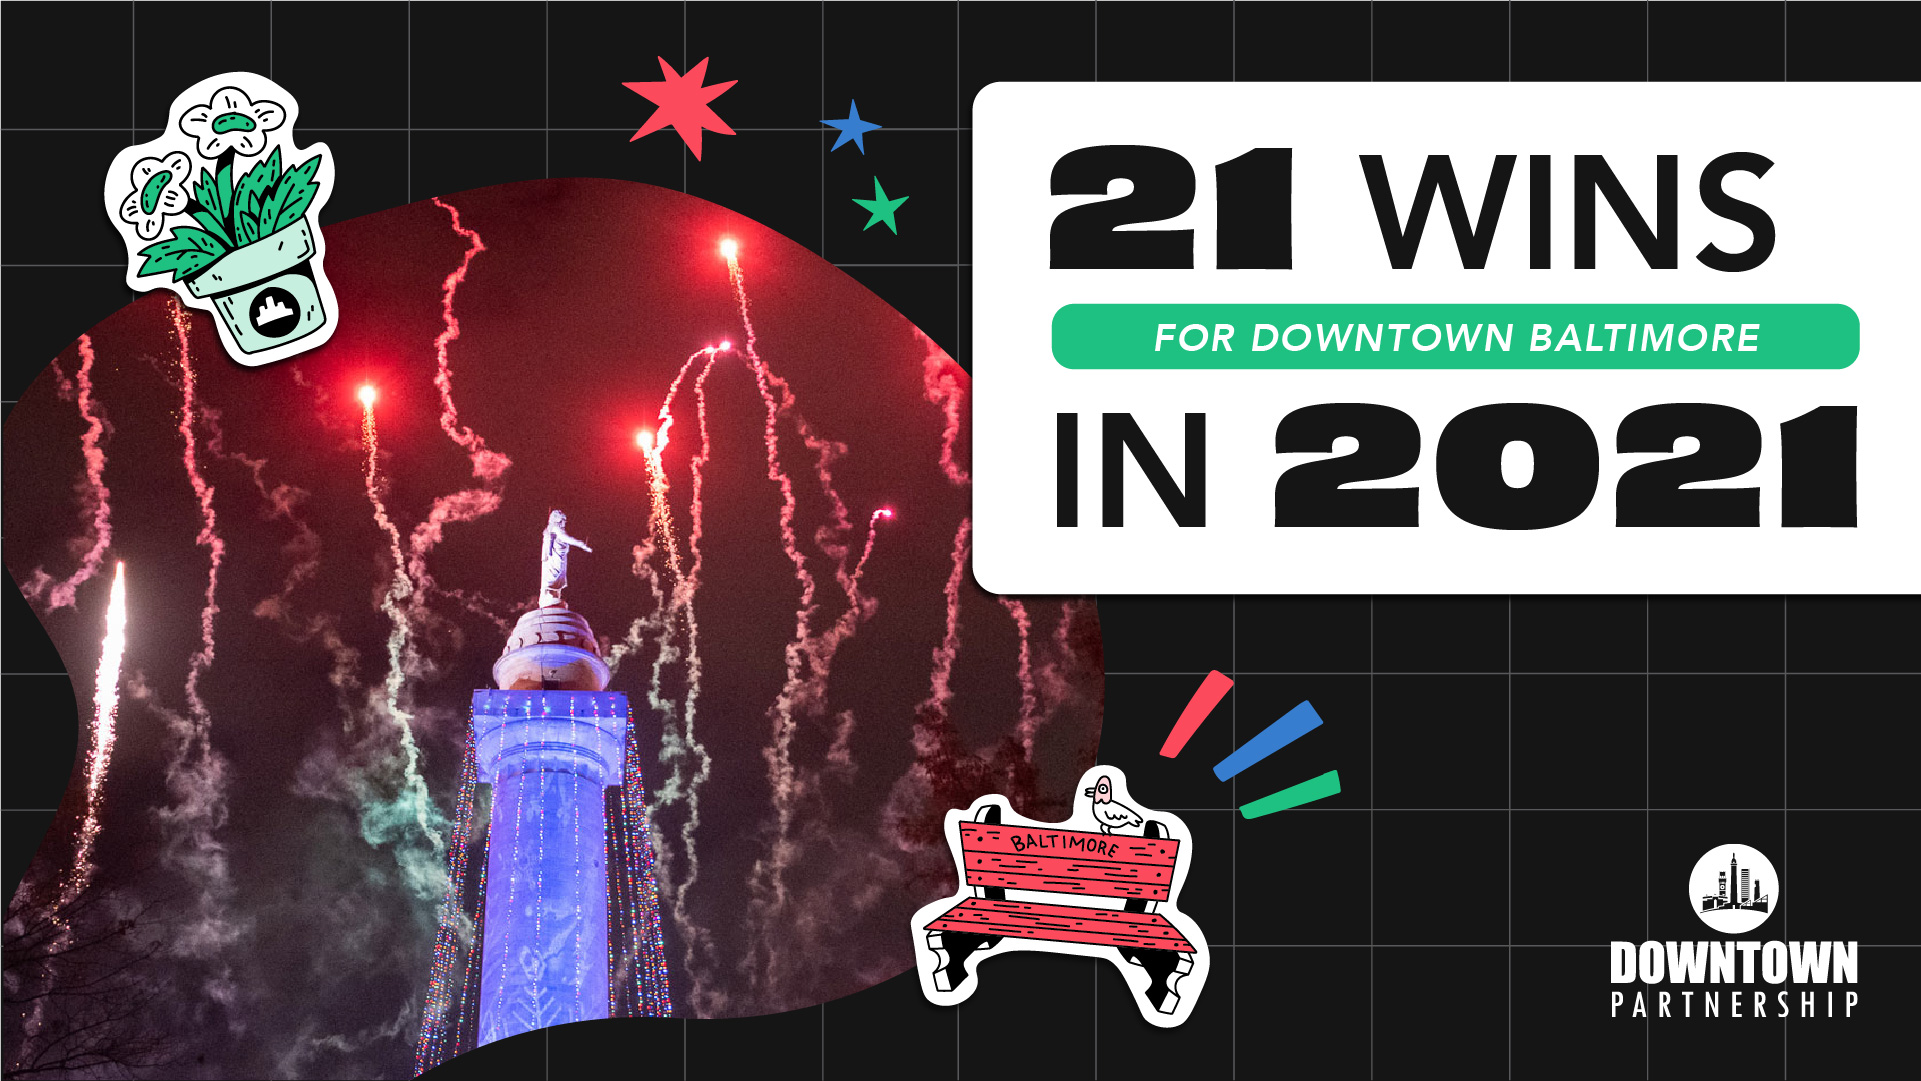 21 Wins for Downtown Baltimore in 2021 decorative header with monument lighting photo.